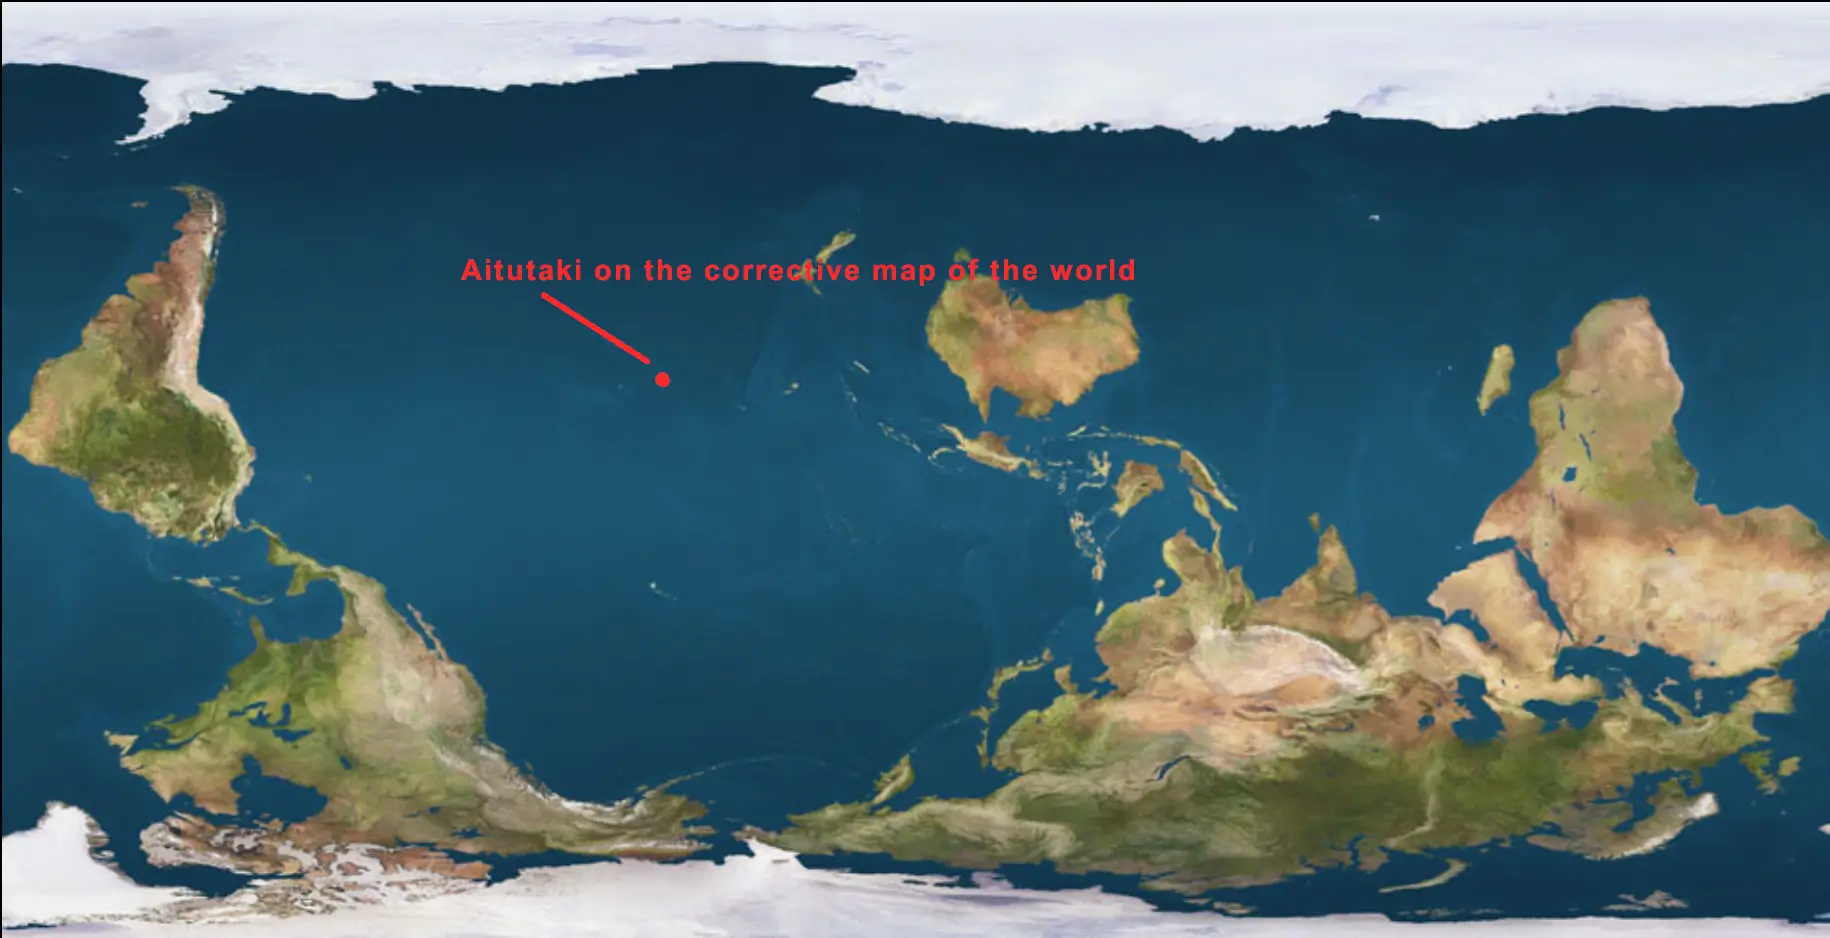 Where Is Aitutaki on the Map of the World?